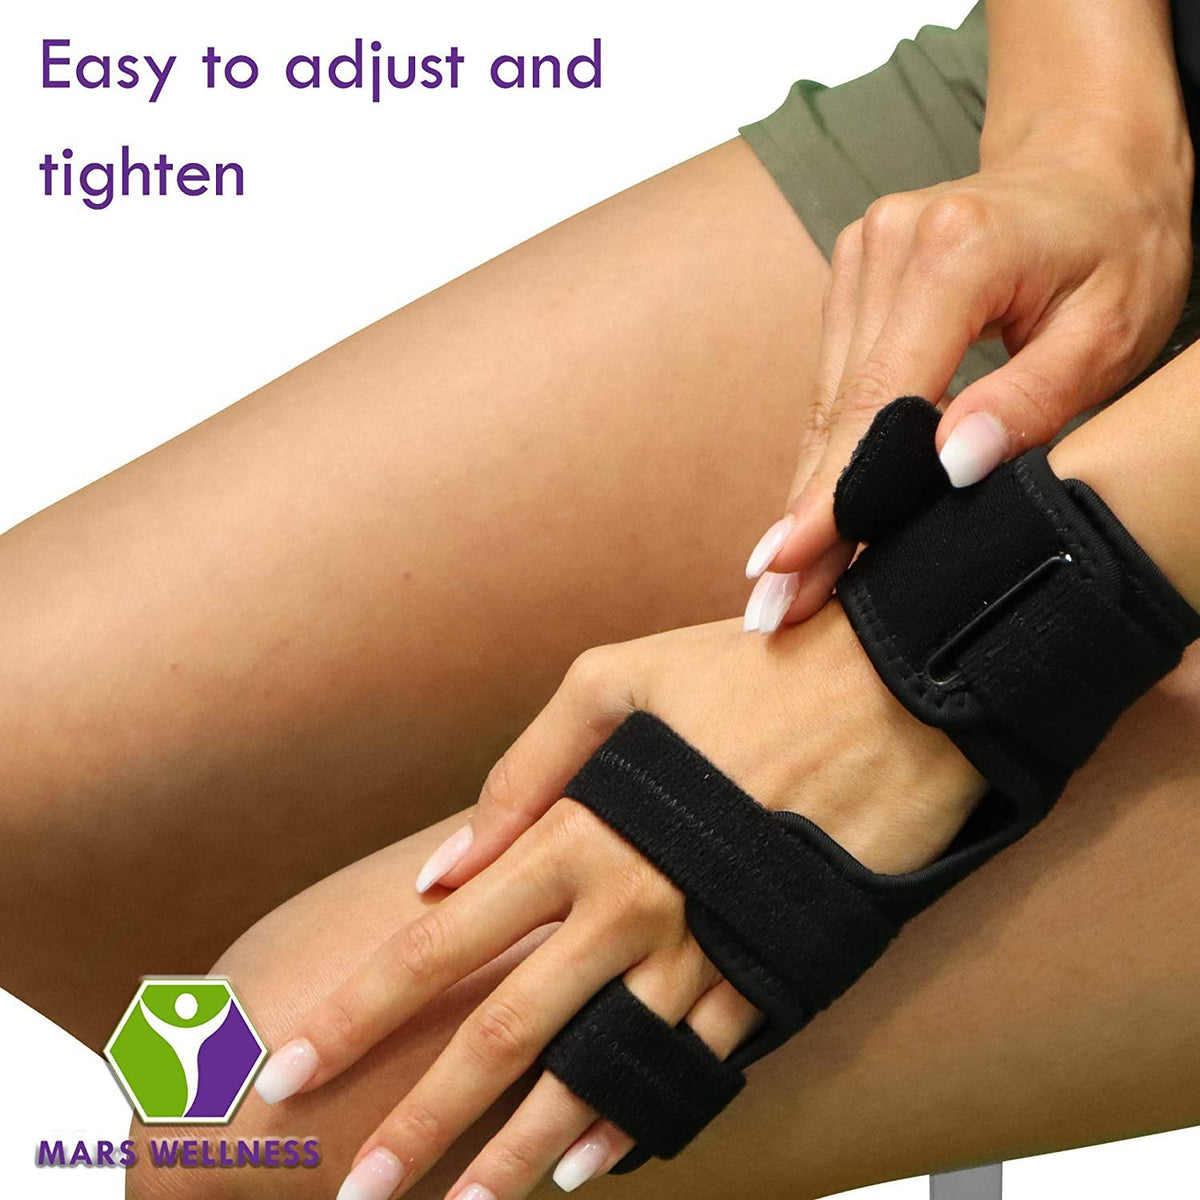 Mars Wellness Boxer Fracture Splint - 4th or 5th Metacarpal Splint Hand and Finger Brace - Broken Fingers, Wrist, Pinky and Hand Immobilizer - Large/X-Large - Mars Med Supply